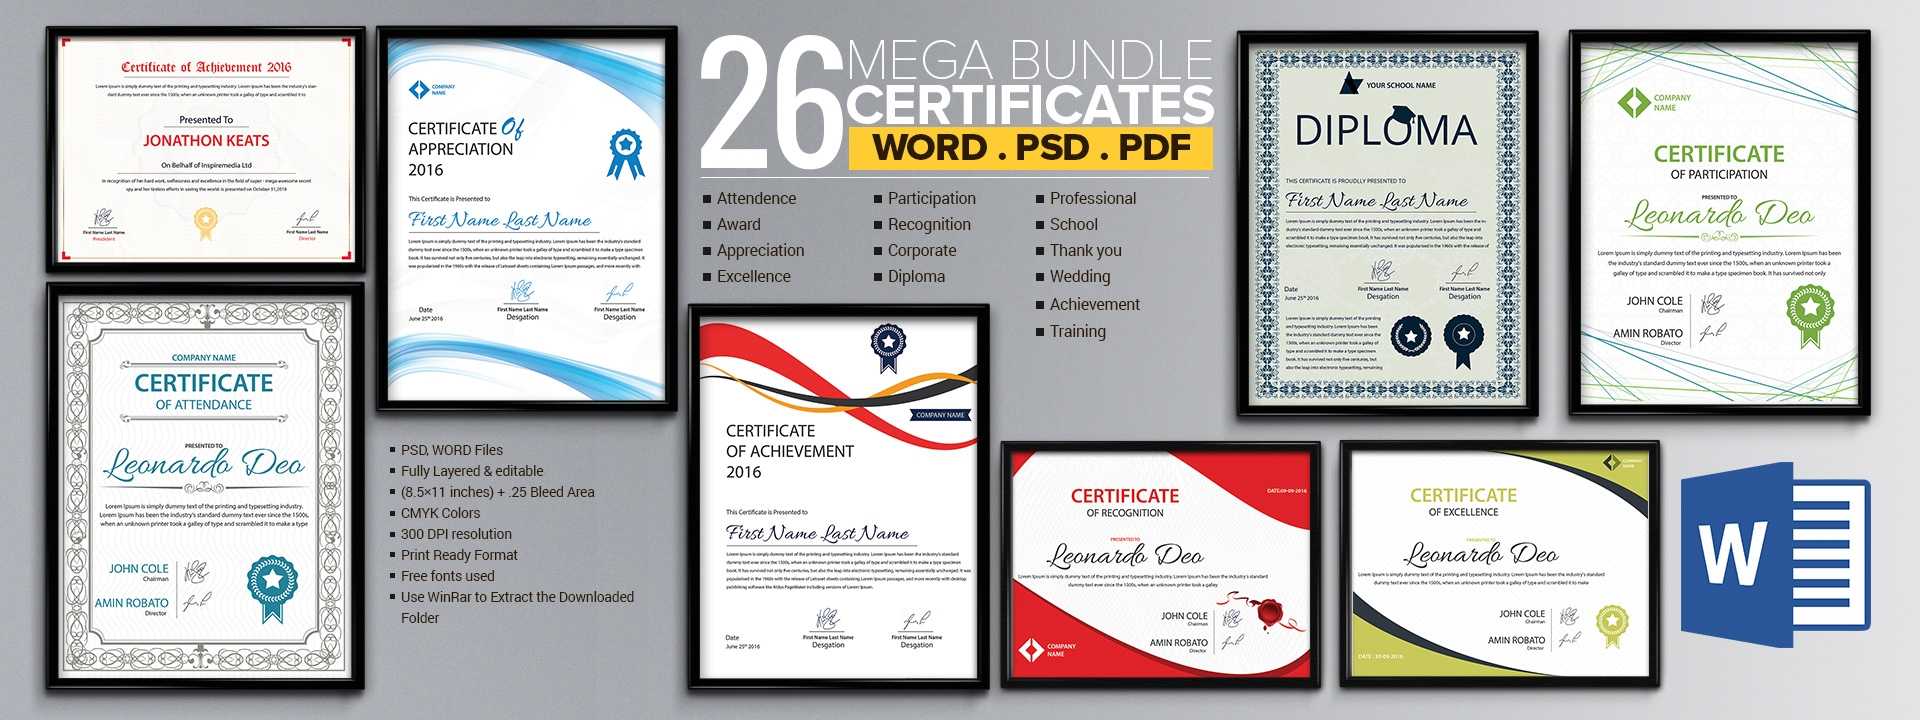 Word Certificate Template - 53+ Free Download Samples Intended For Free Certificate Templates For Word 2007